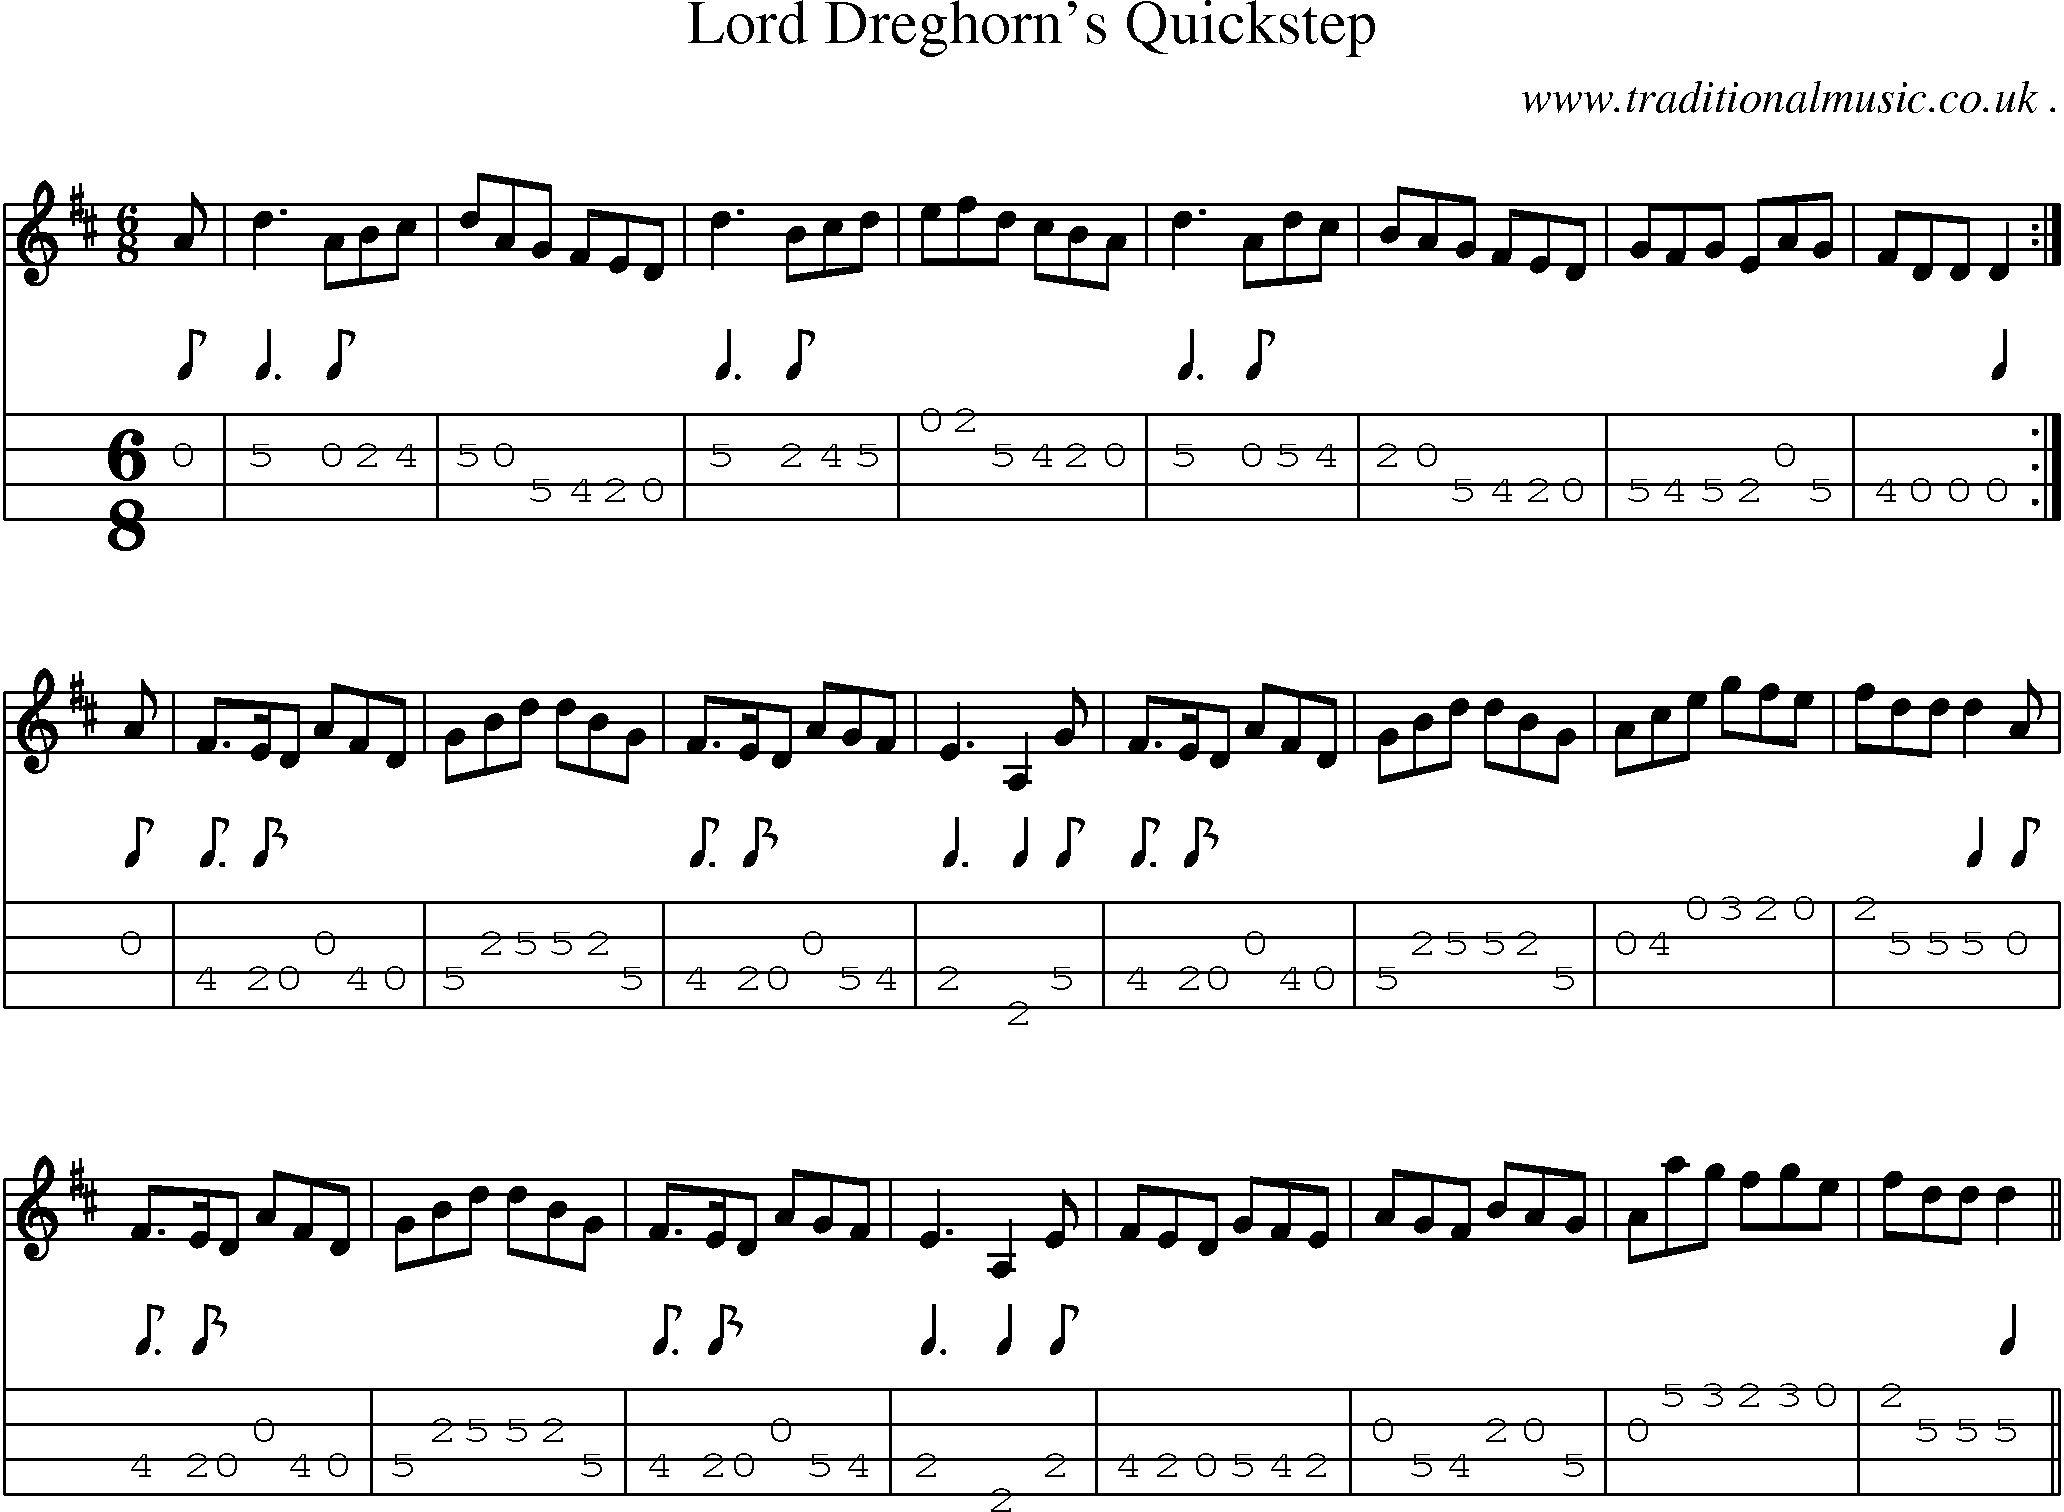 Sheet-music  score, Chords and Mandolin Tabs for Lord Dreghorns Quickstep